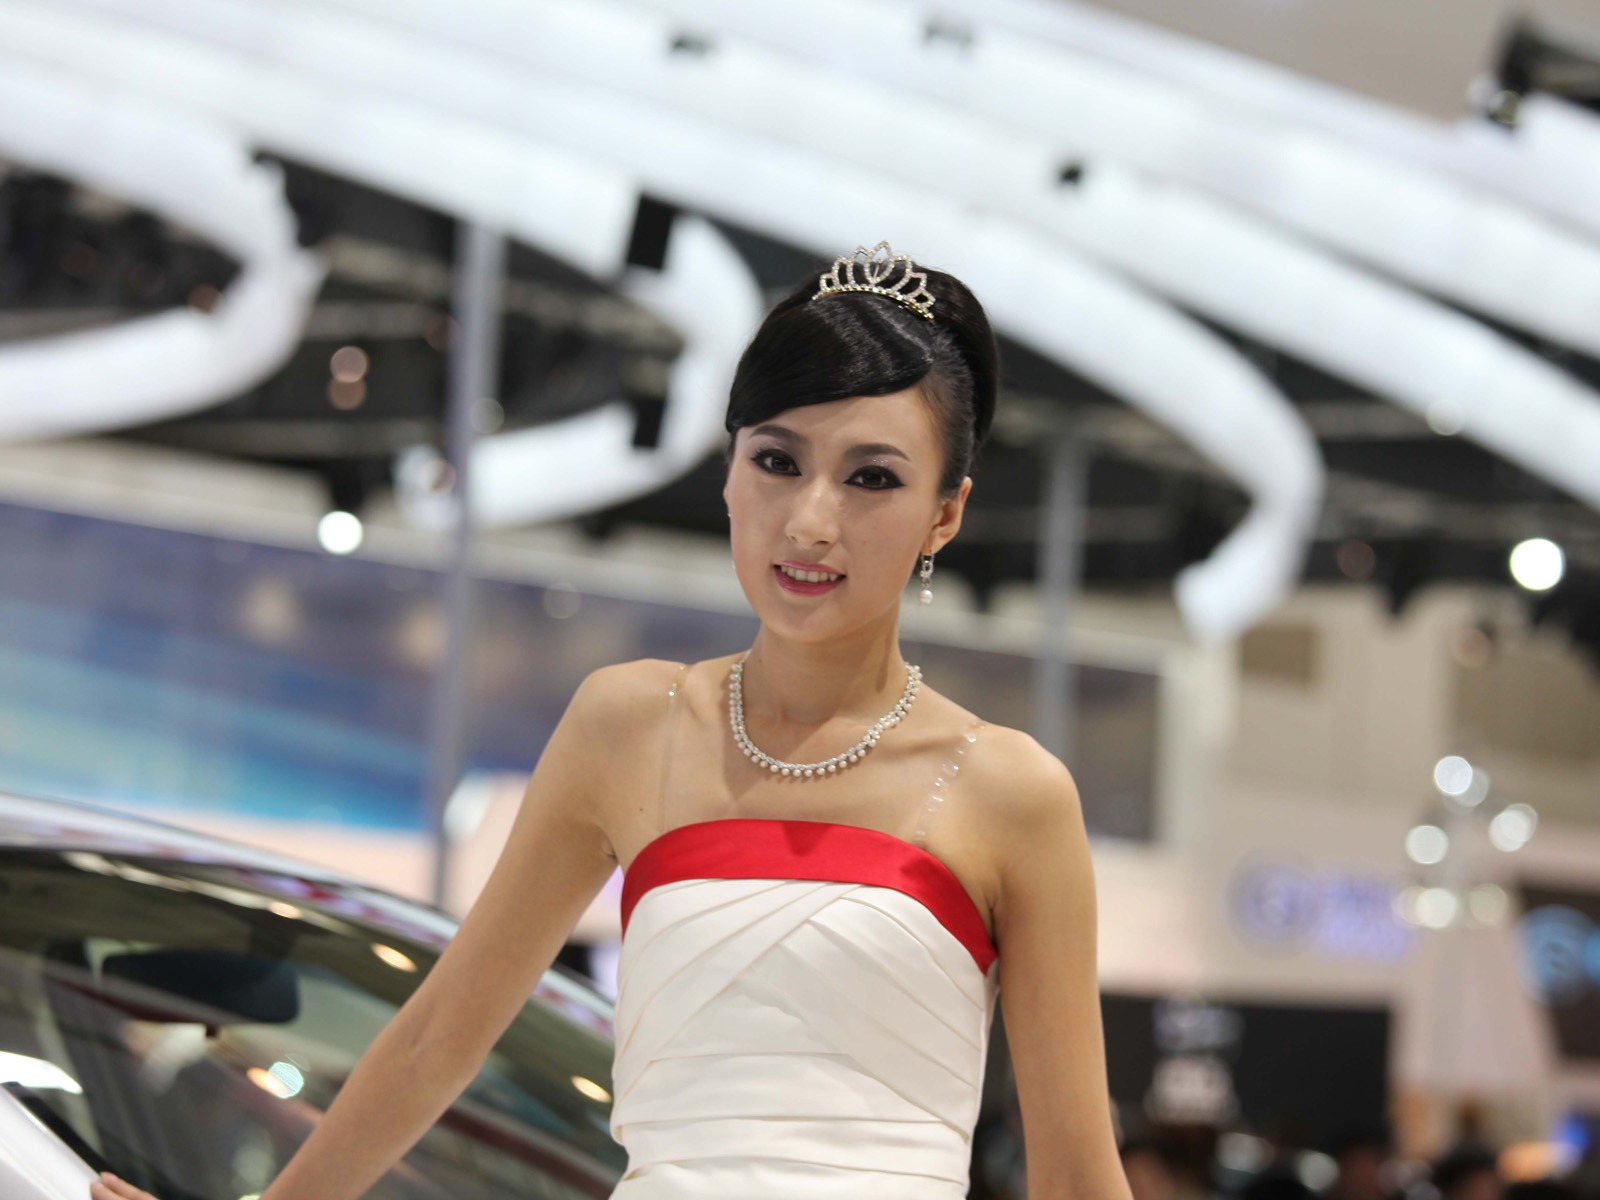 2010 Beijing International Auto Show beauty (1) (the wind chasing the clouds works) #27 - 1600x1200